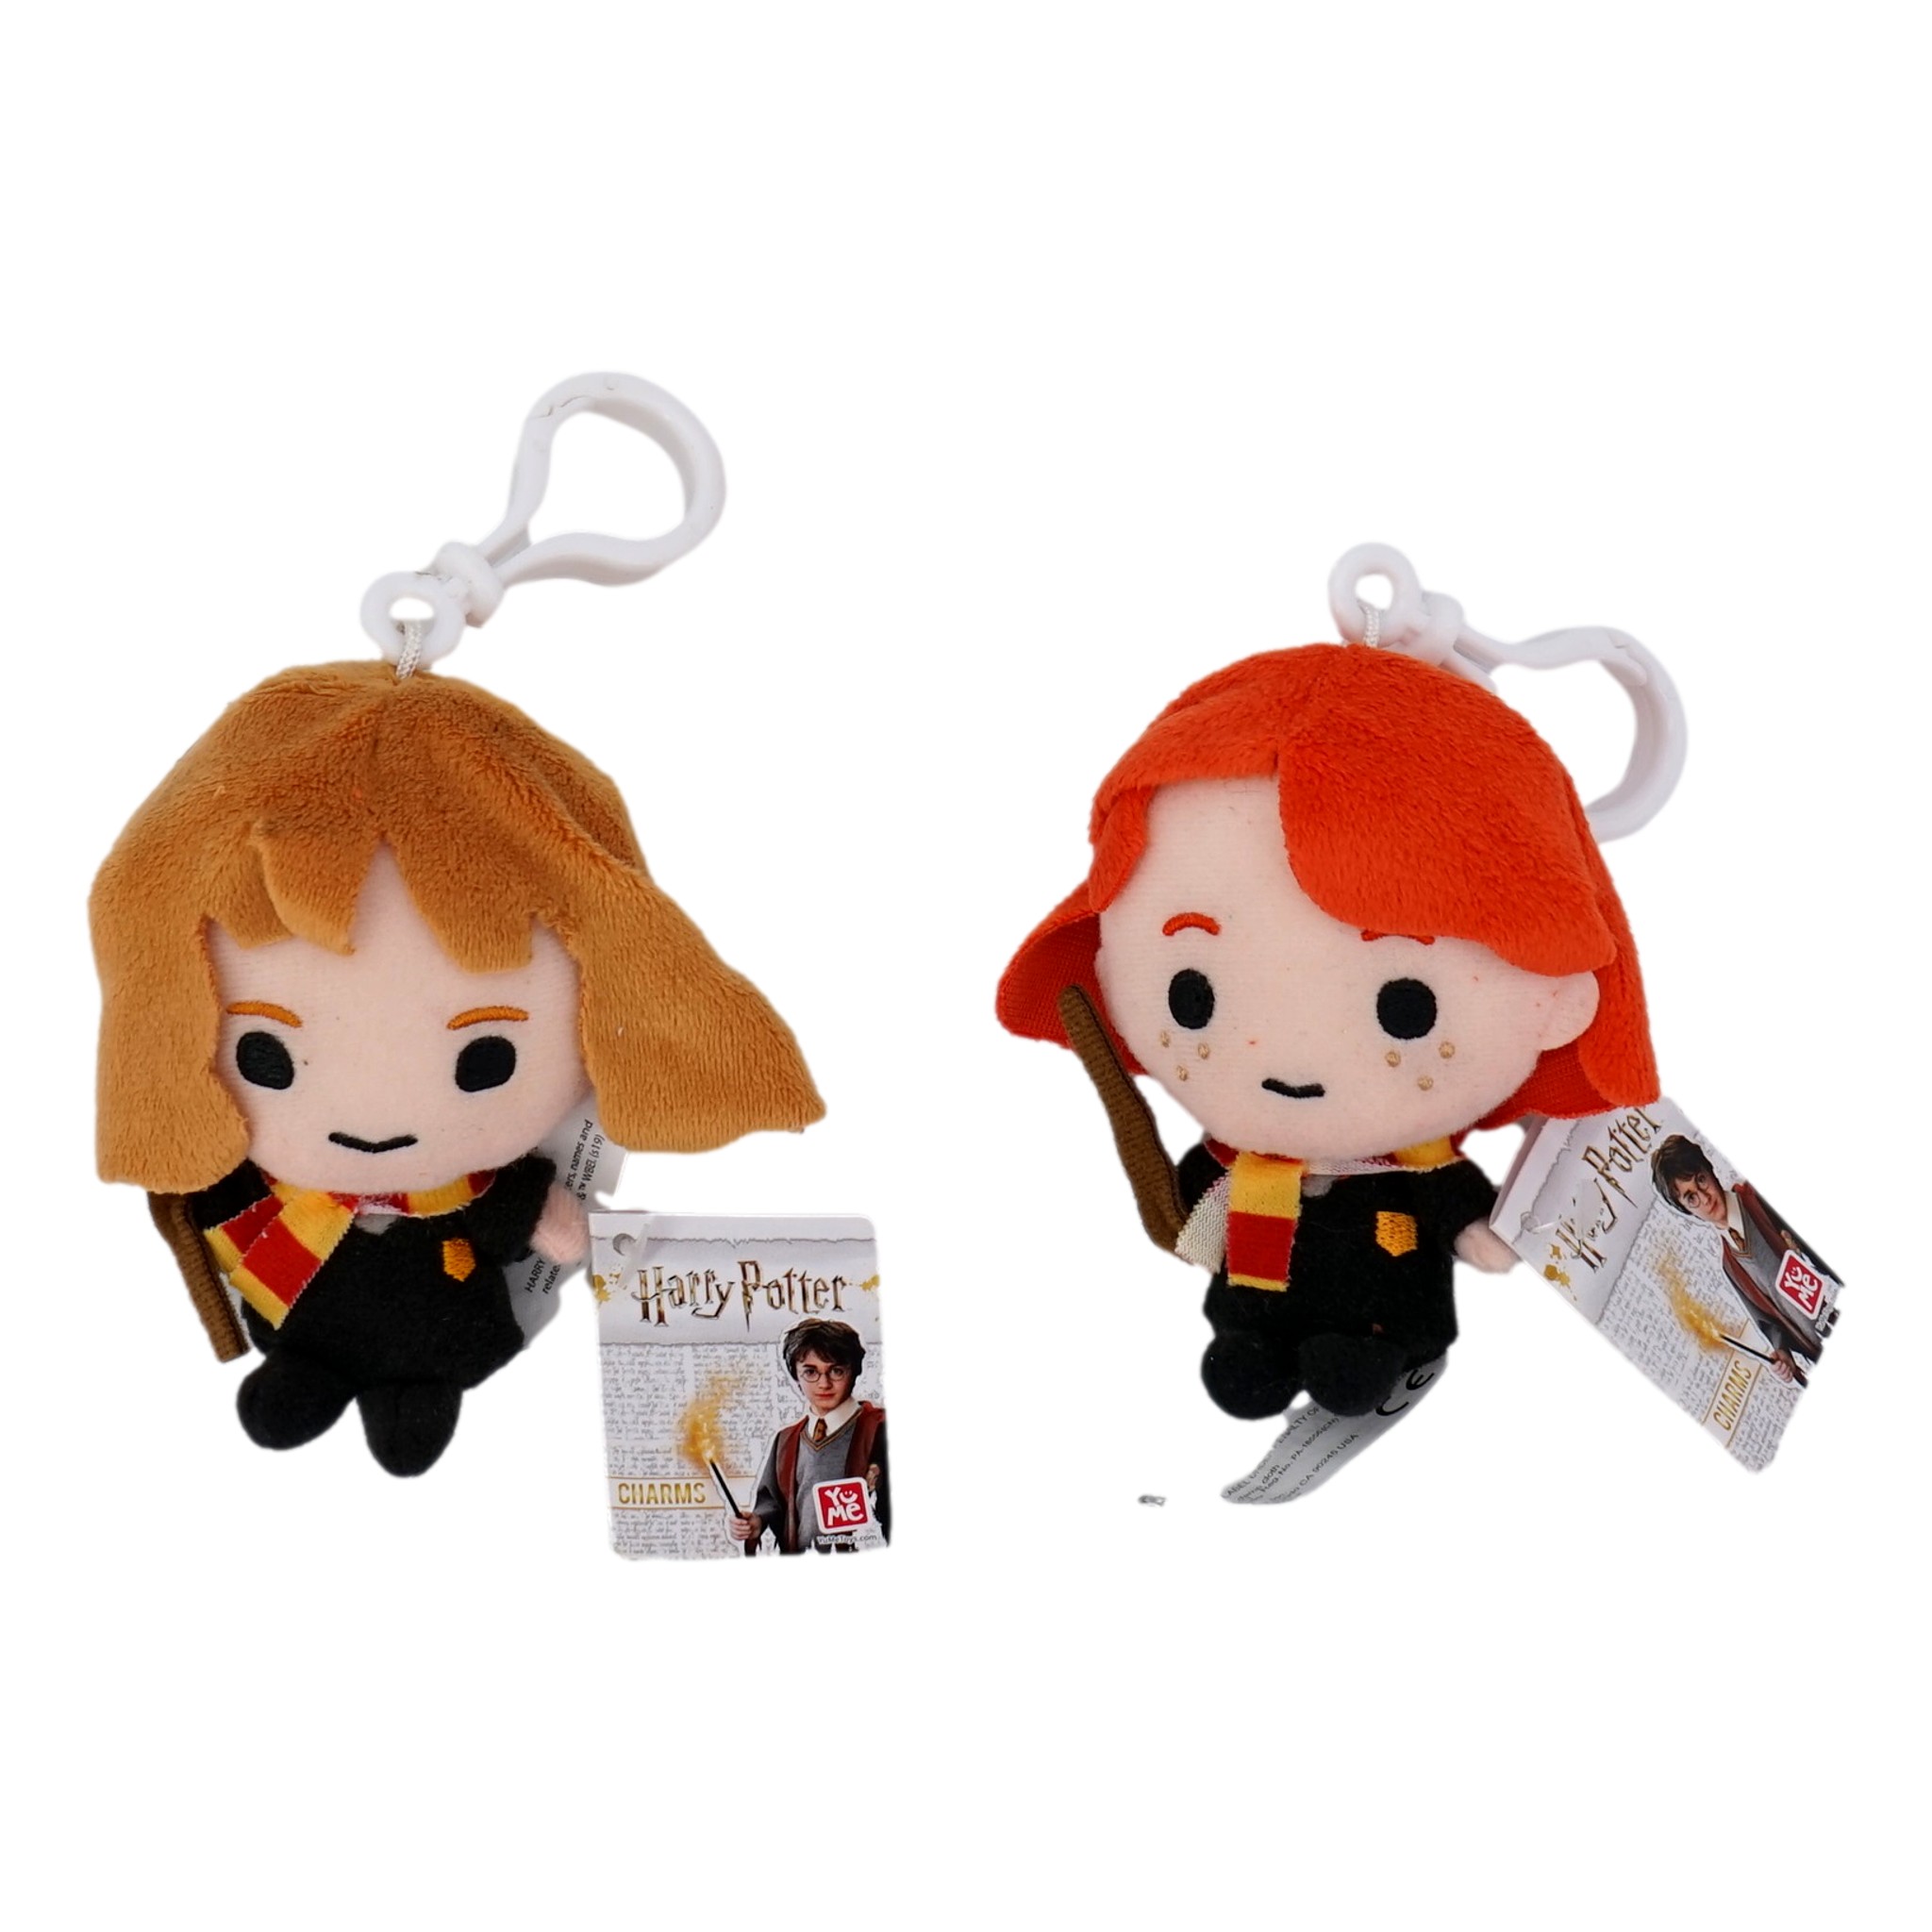 Treasure Co Trio Harry Potter 4 inch Plush Toy Bag Clip Hermione Granger and Ron Weasley Clip on Backpack Collectible Figure